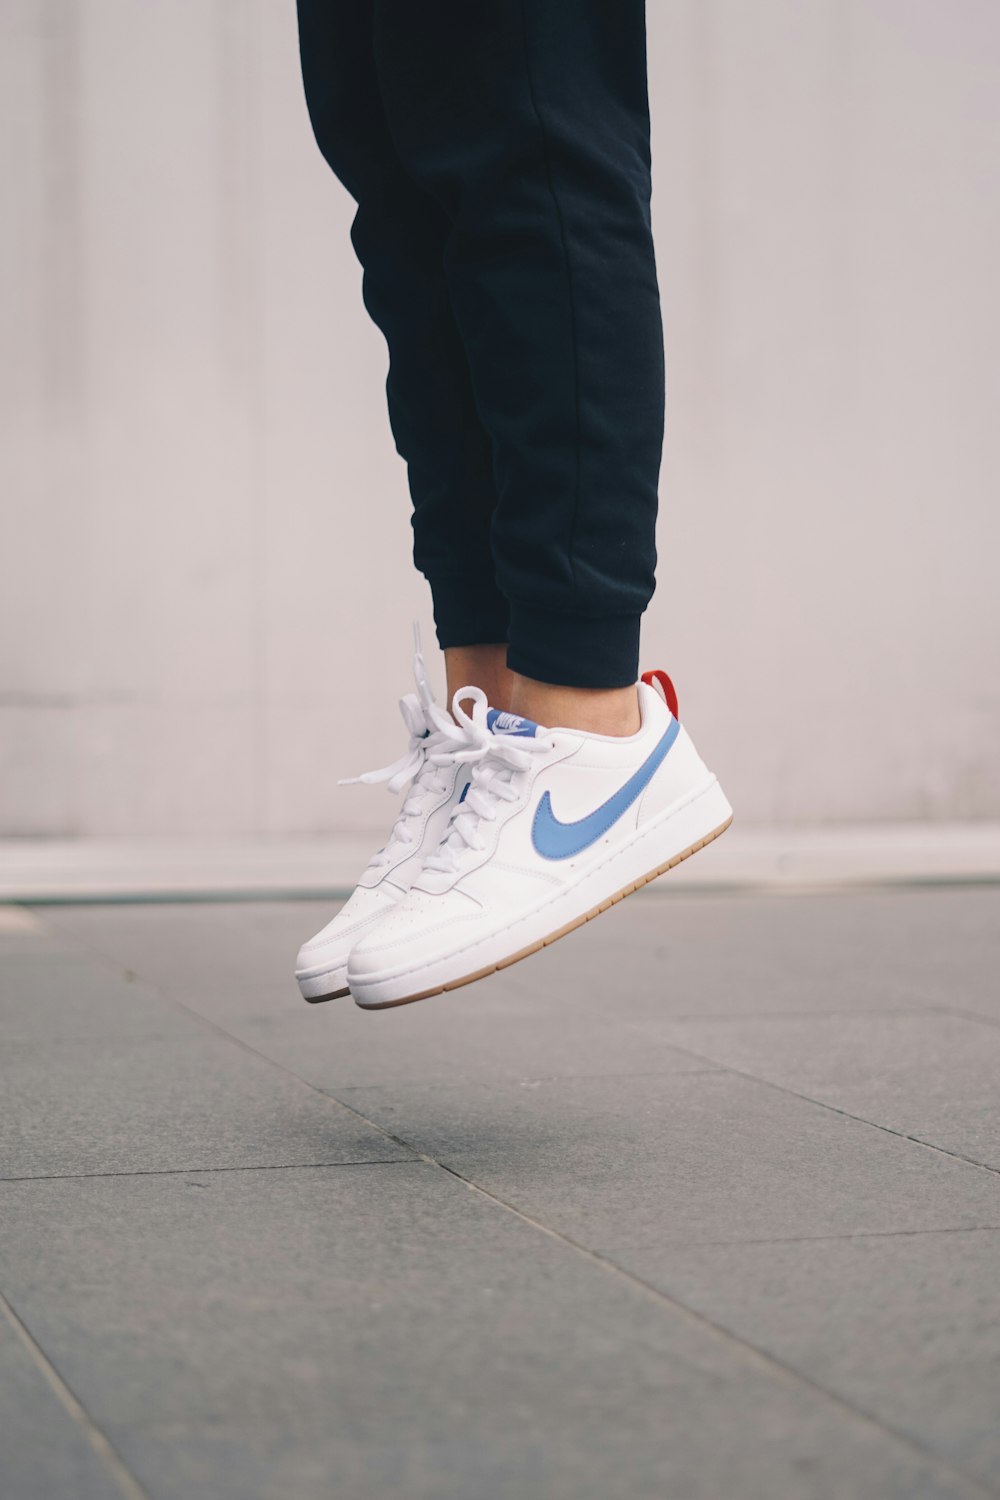 person in blue and white nike sneakers